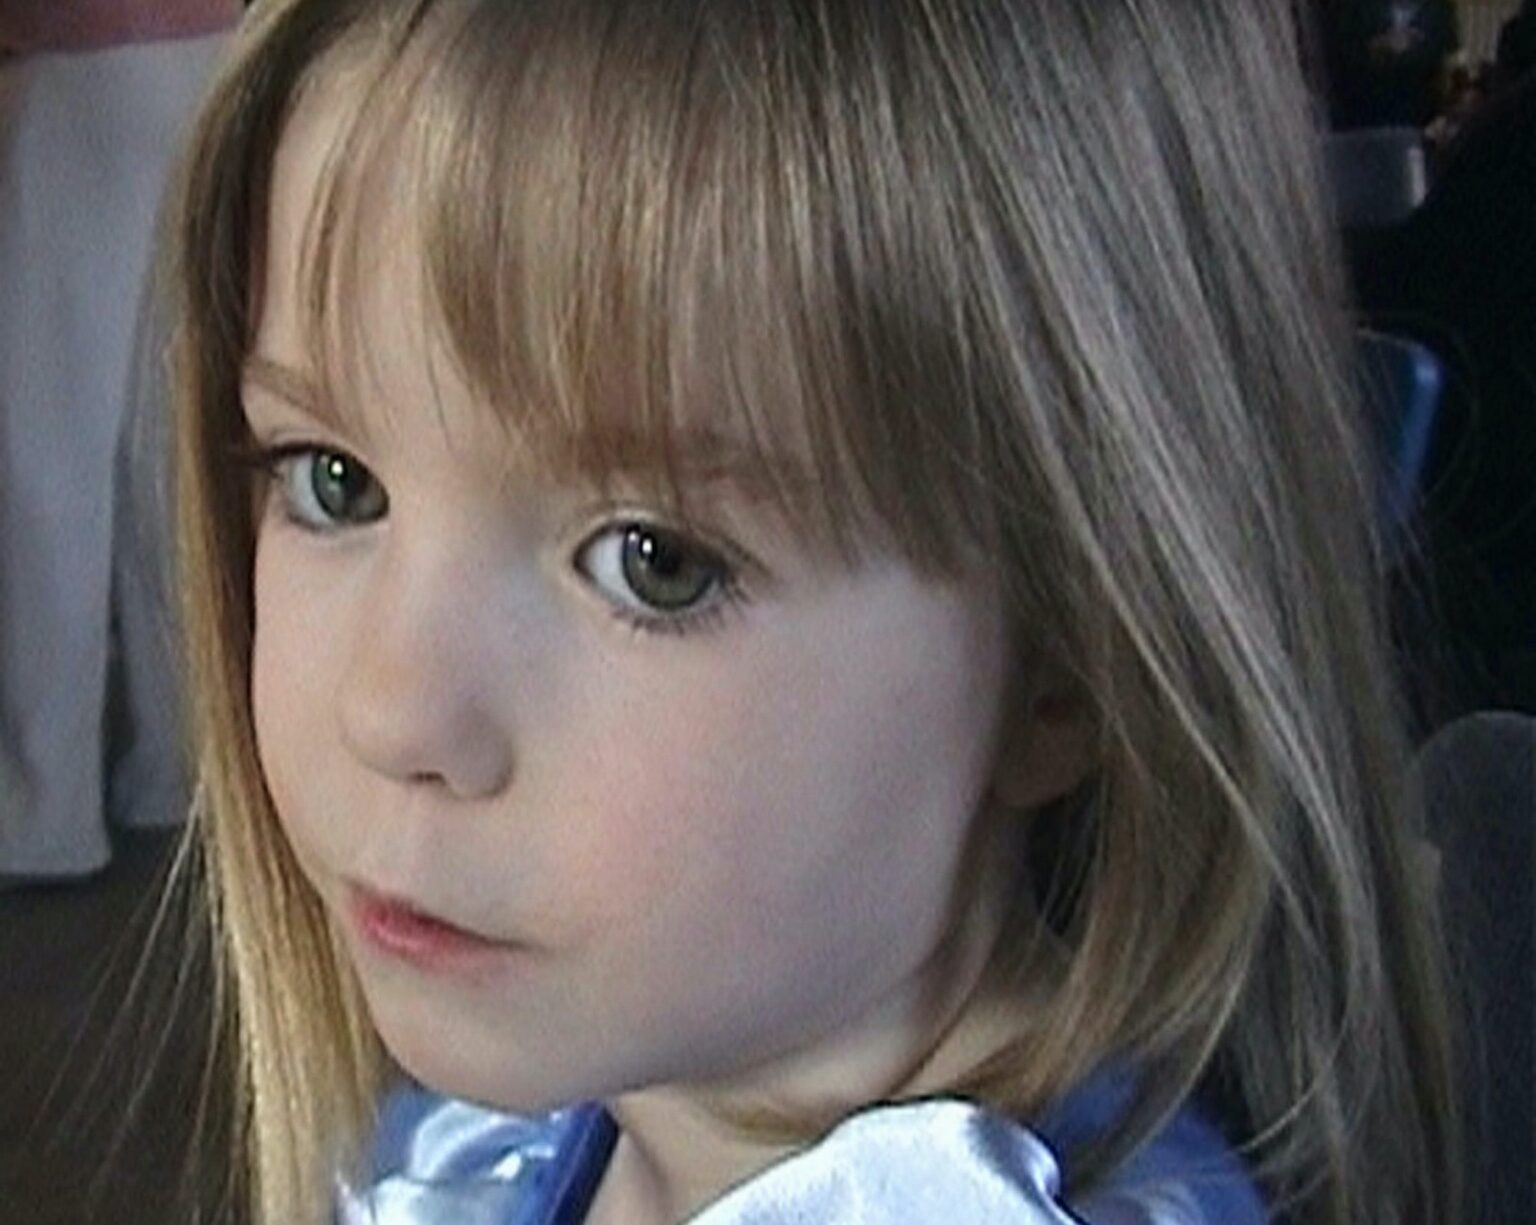 After two missing children cases were recently solved, Madeleine McCann's parents have regained hope. Is it possible that Madeleine can be found alive?